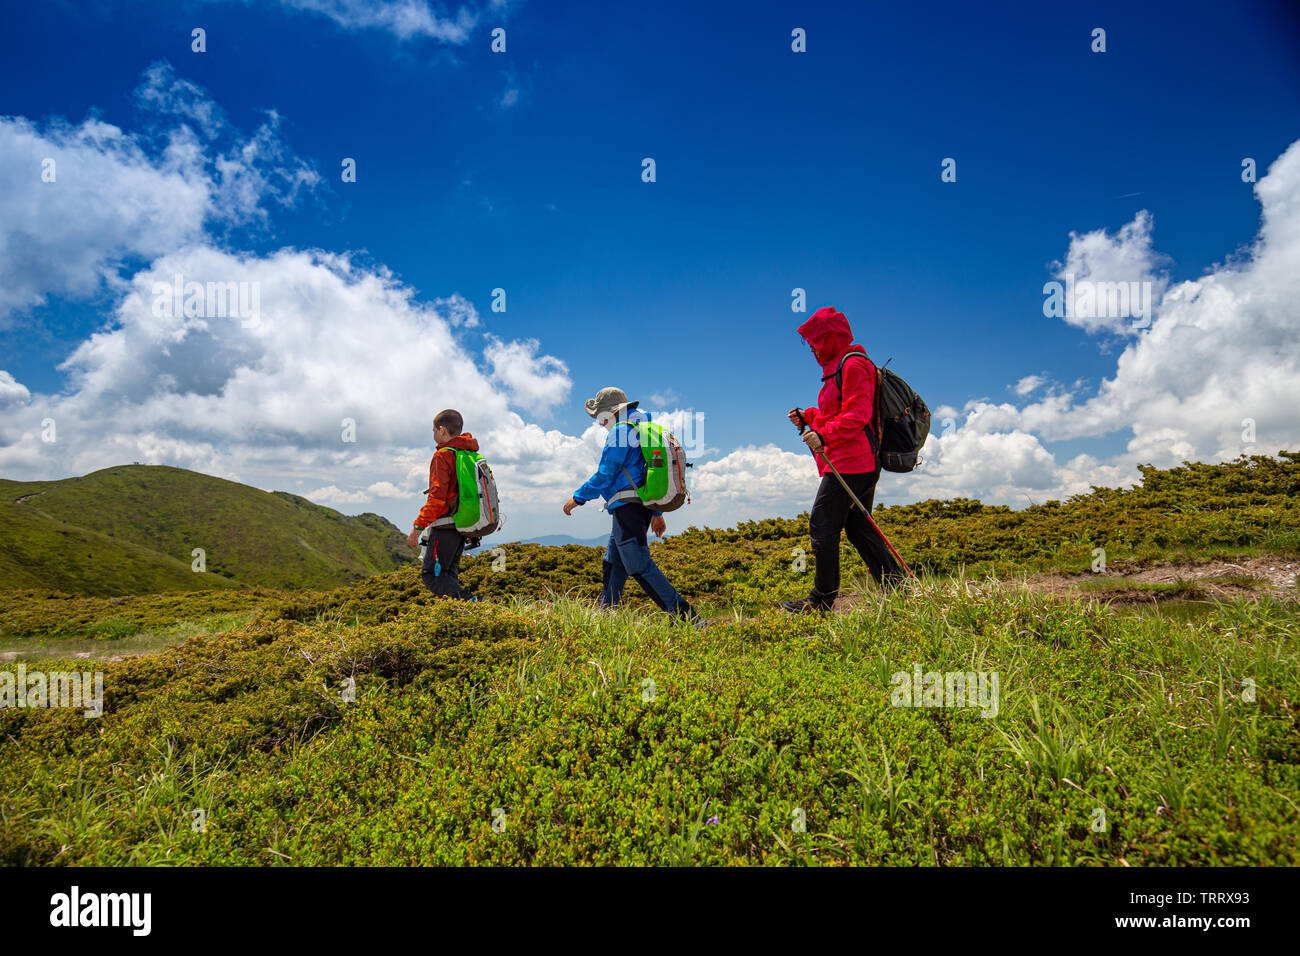 Mom with two kids hiking in mountains Stock Photo